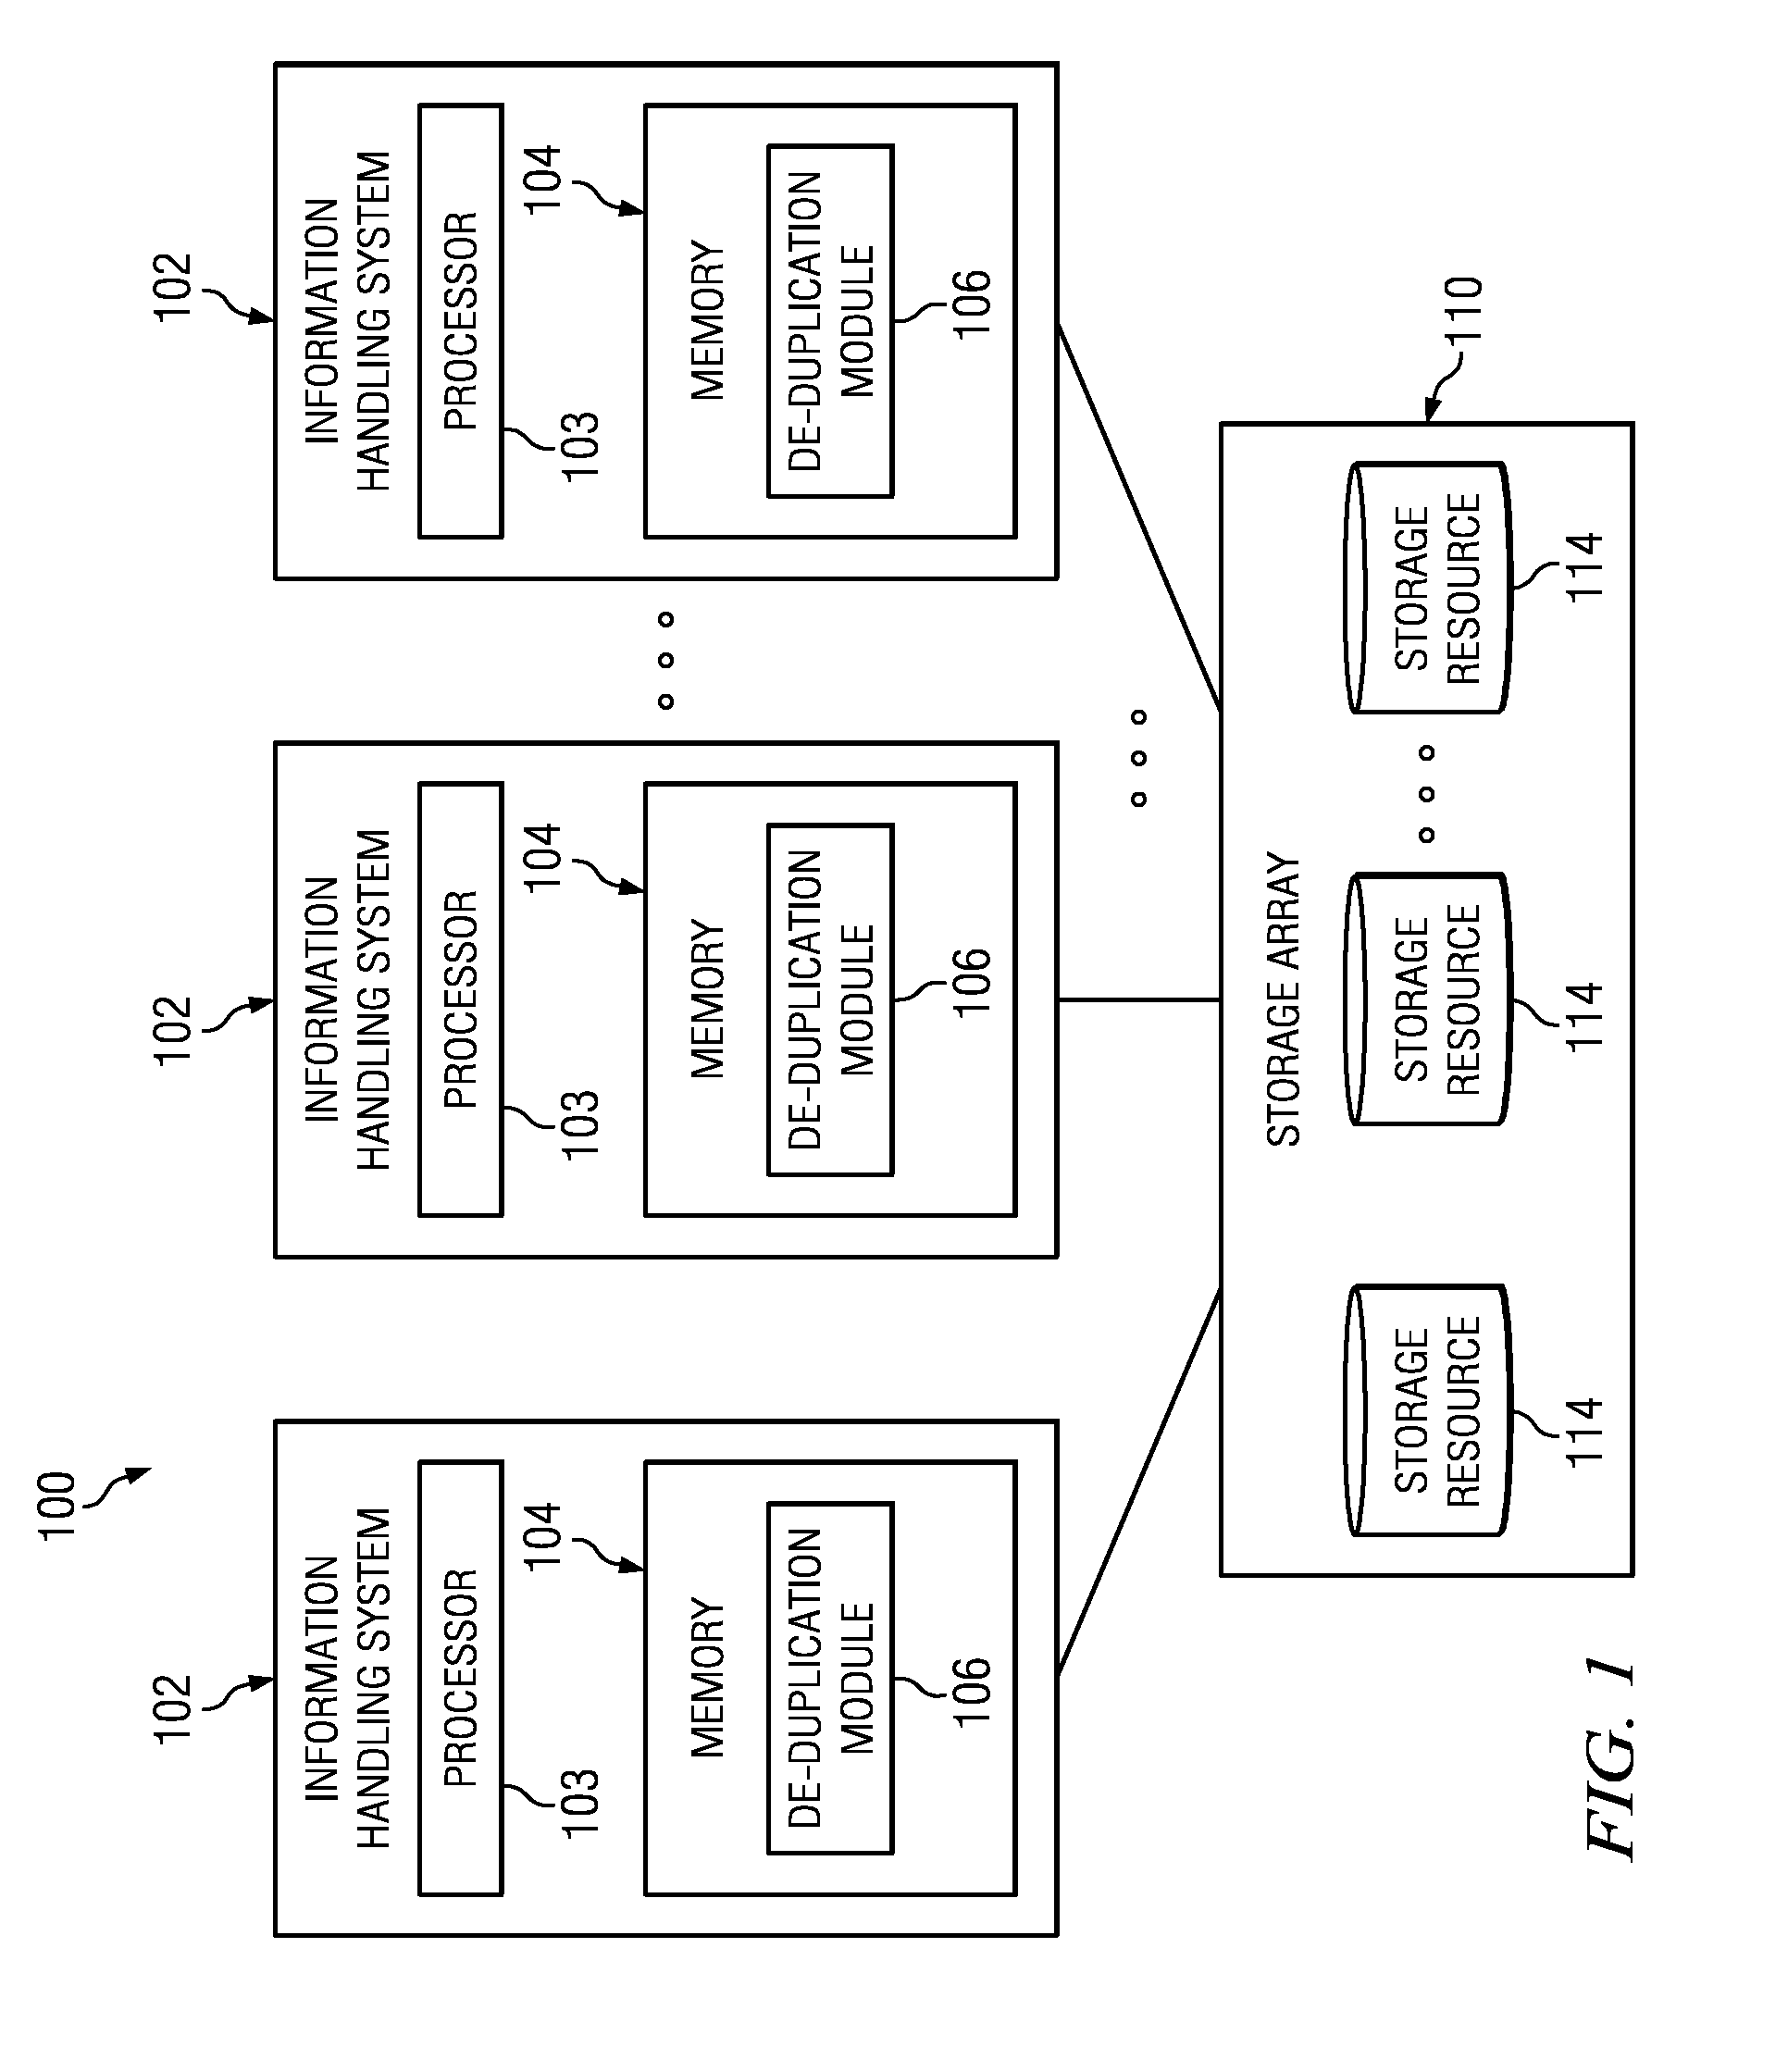 Systems and methods for de-duplication in storage systems